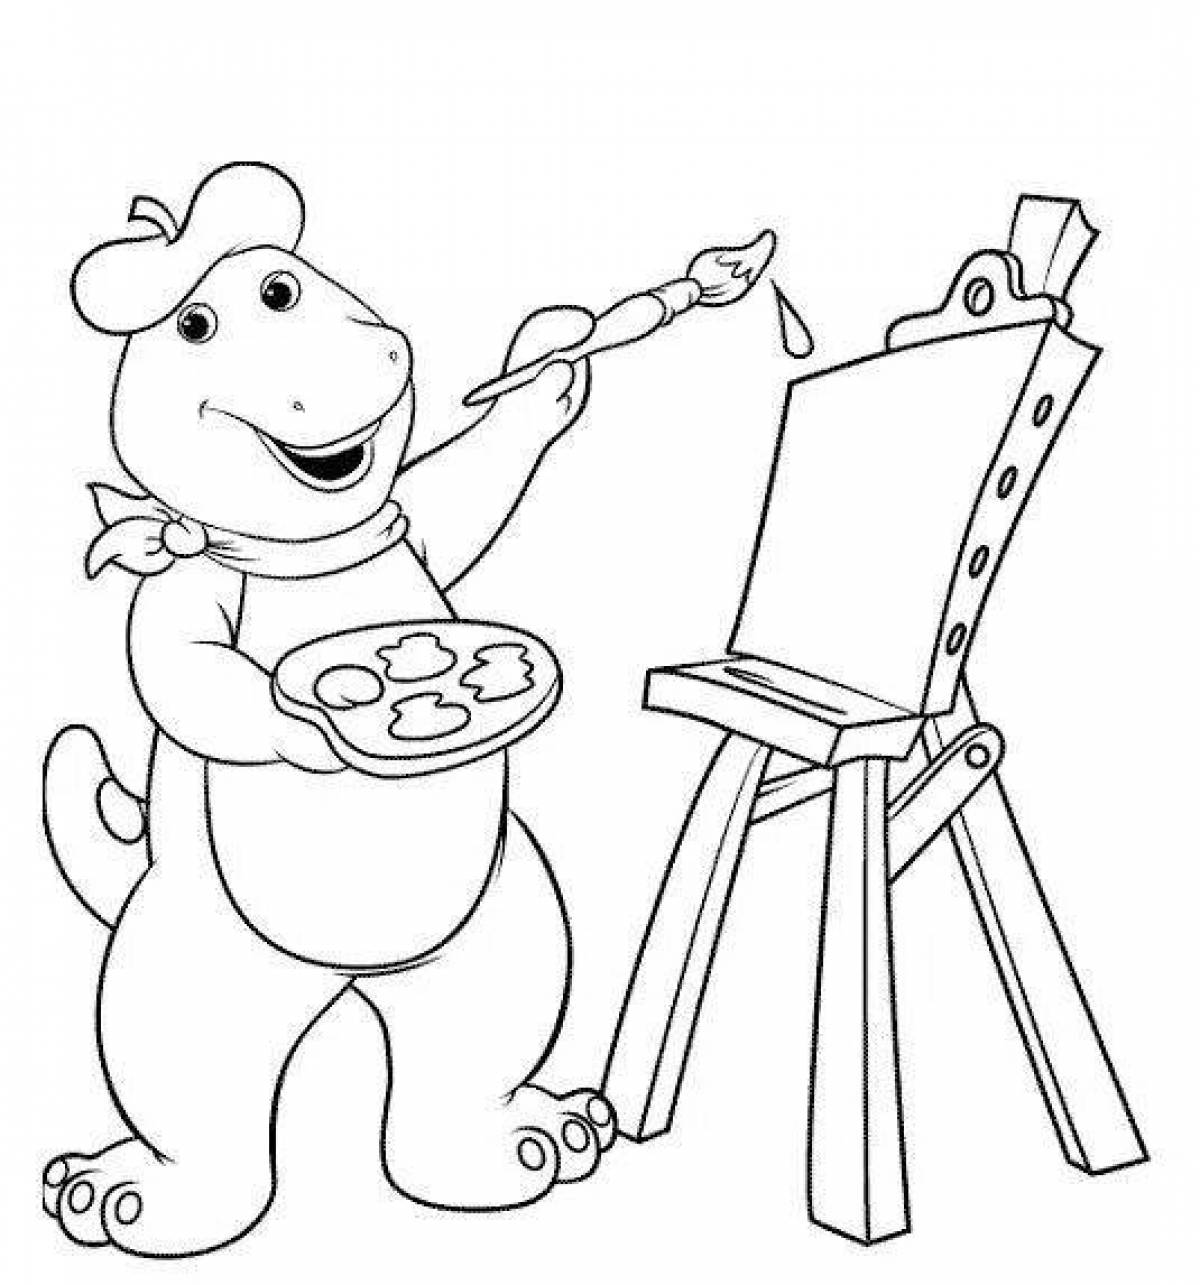 Gorgeous barney coloring book